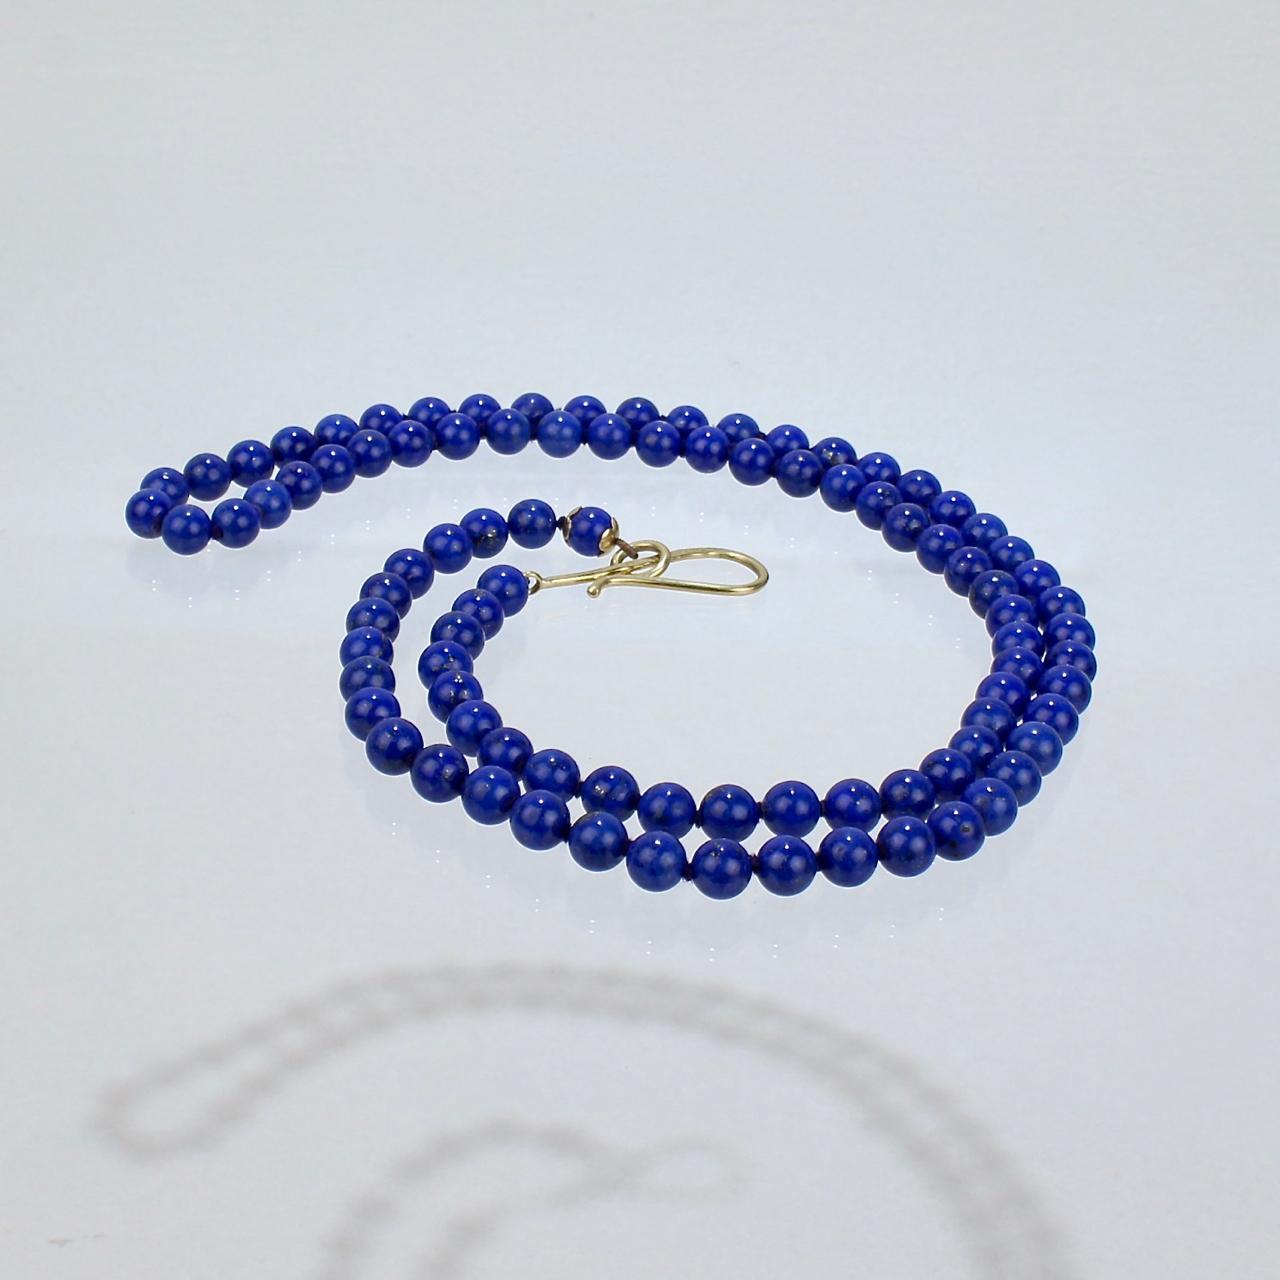 A very fine opera length necklace by Silvia Kelly.

With 8mm blue Lapis Lazuli round beads and a hammered hook-and-eye 18k gold clasp.

Marked to the clasp: 750 for 18k gold fineness, Silvia Kelly, and Italy.

 An incredibly versatile and wearable